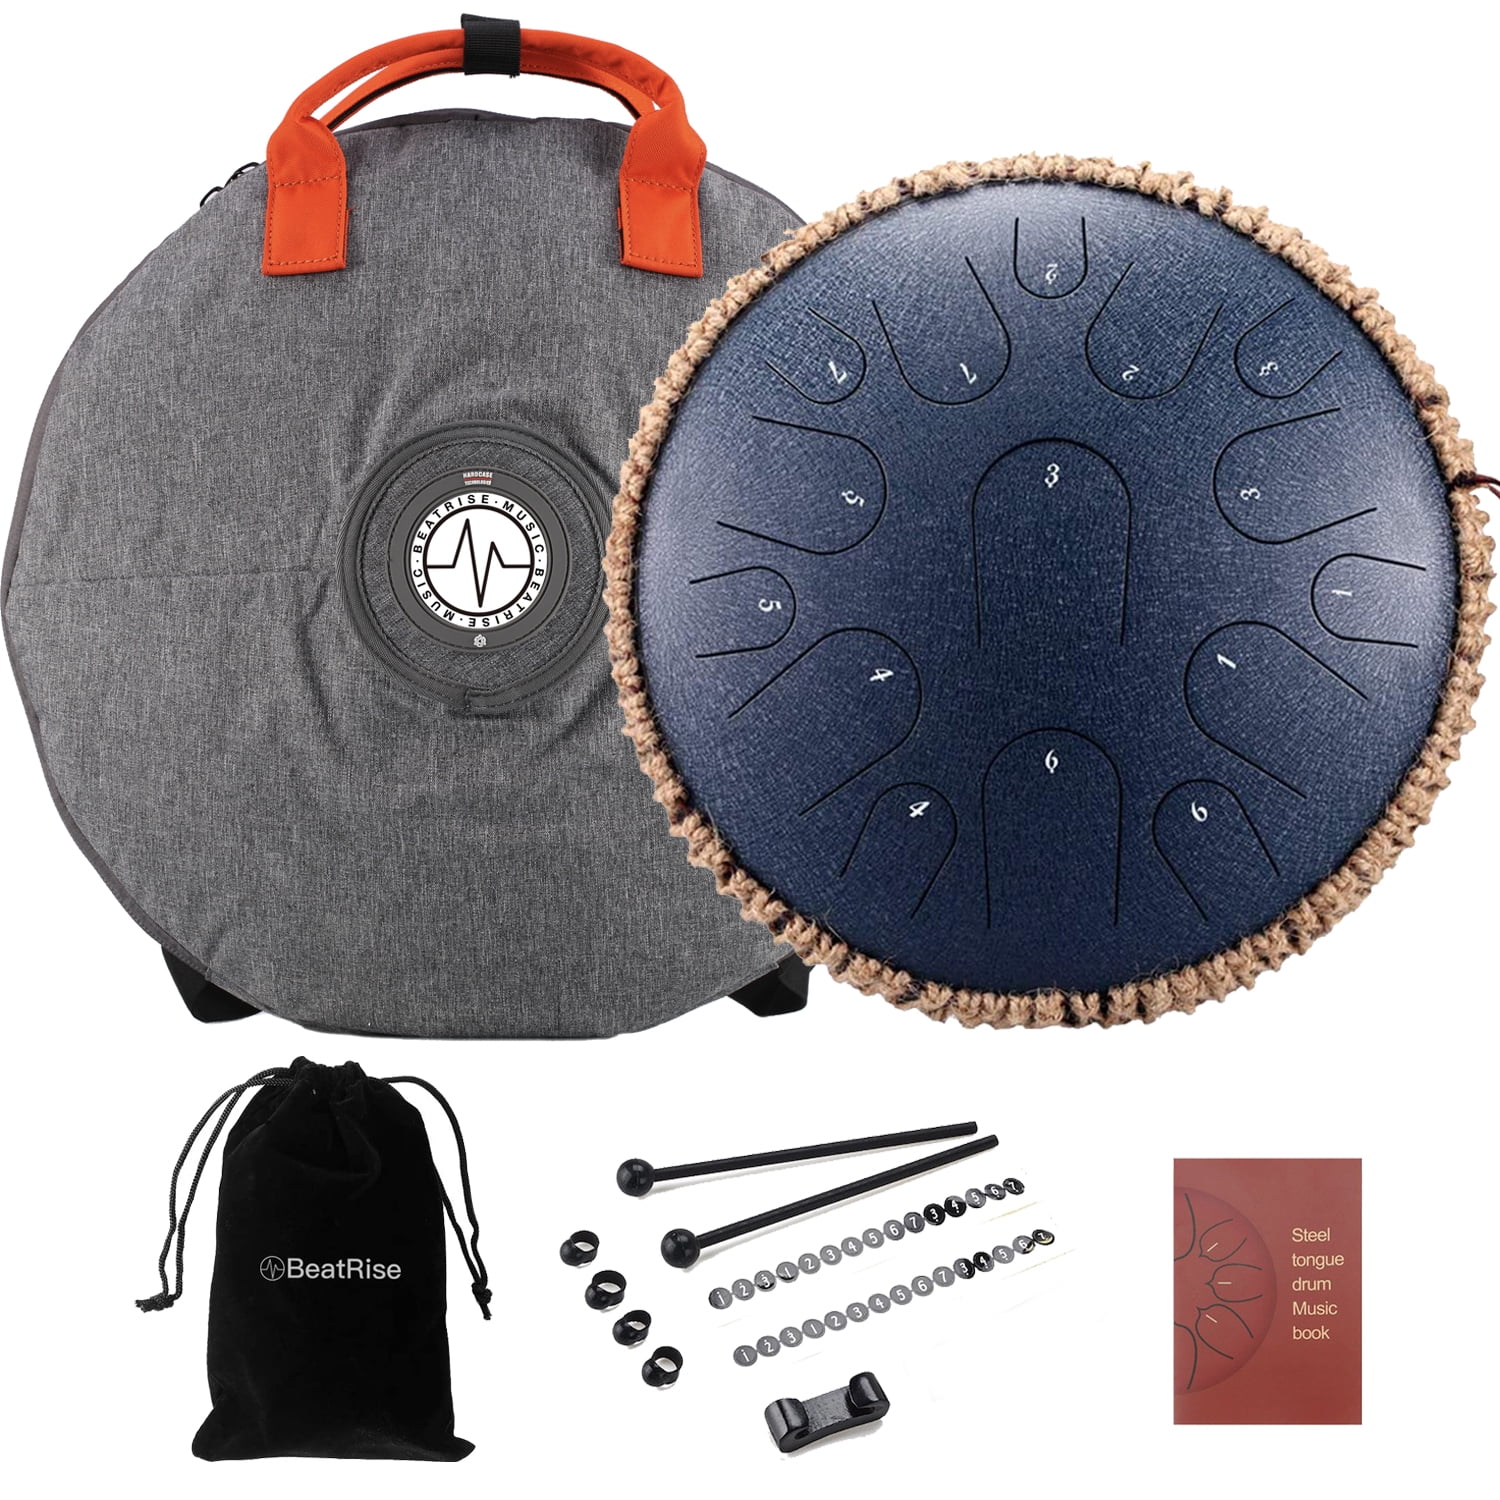 New Steel Tongue Drum for Mind Healing Yoga, 4 Colors Options